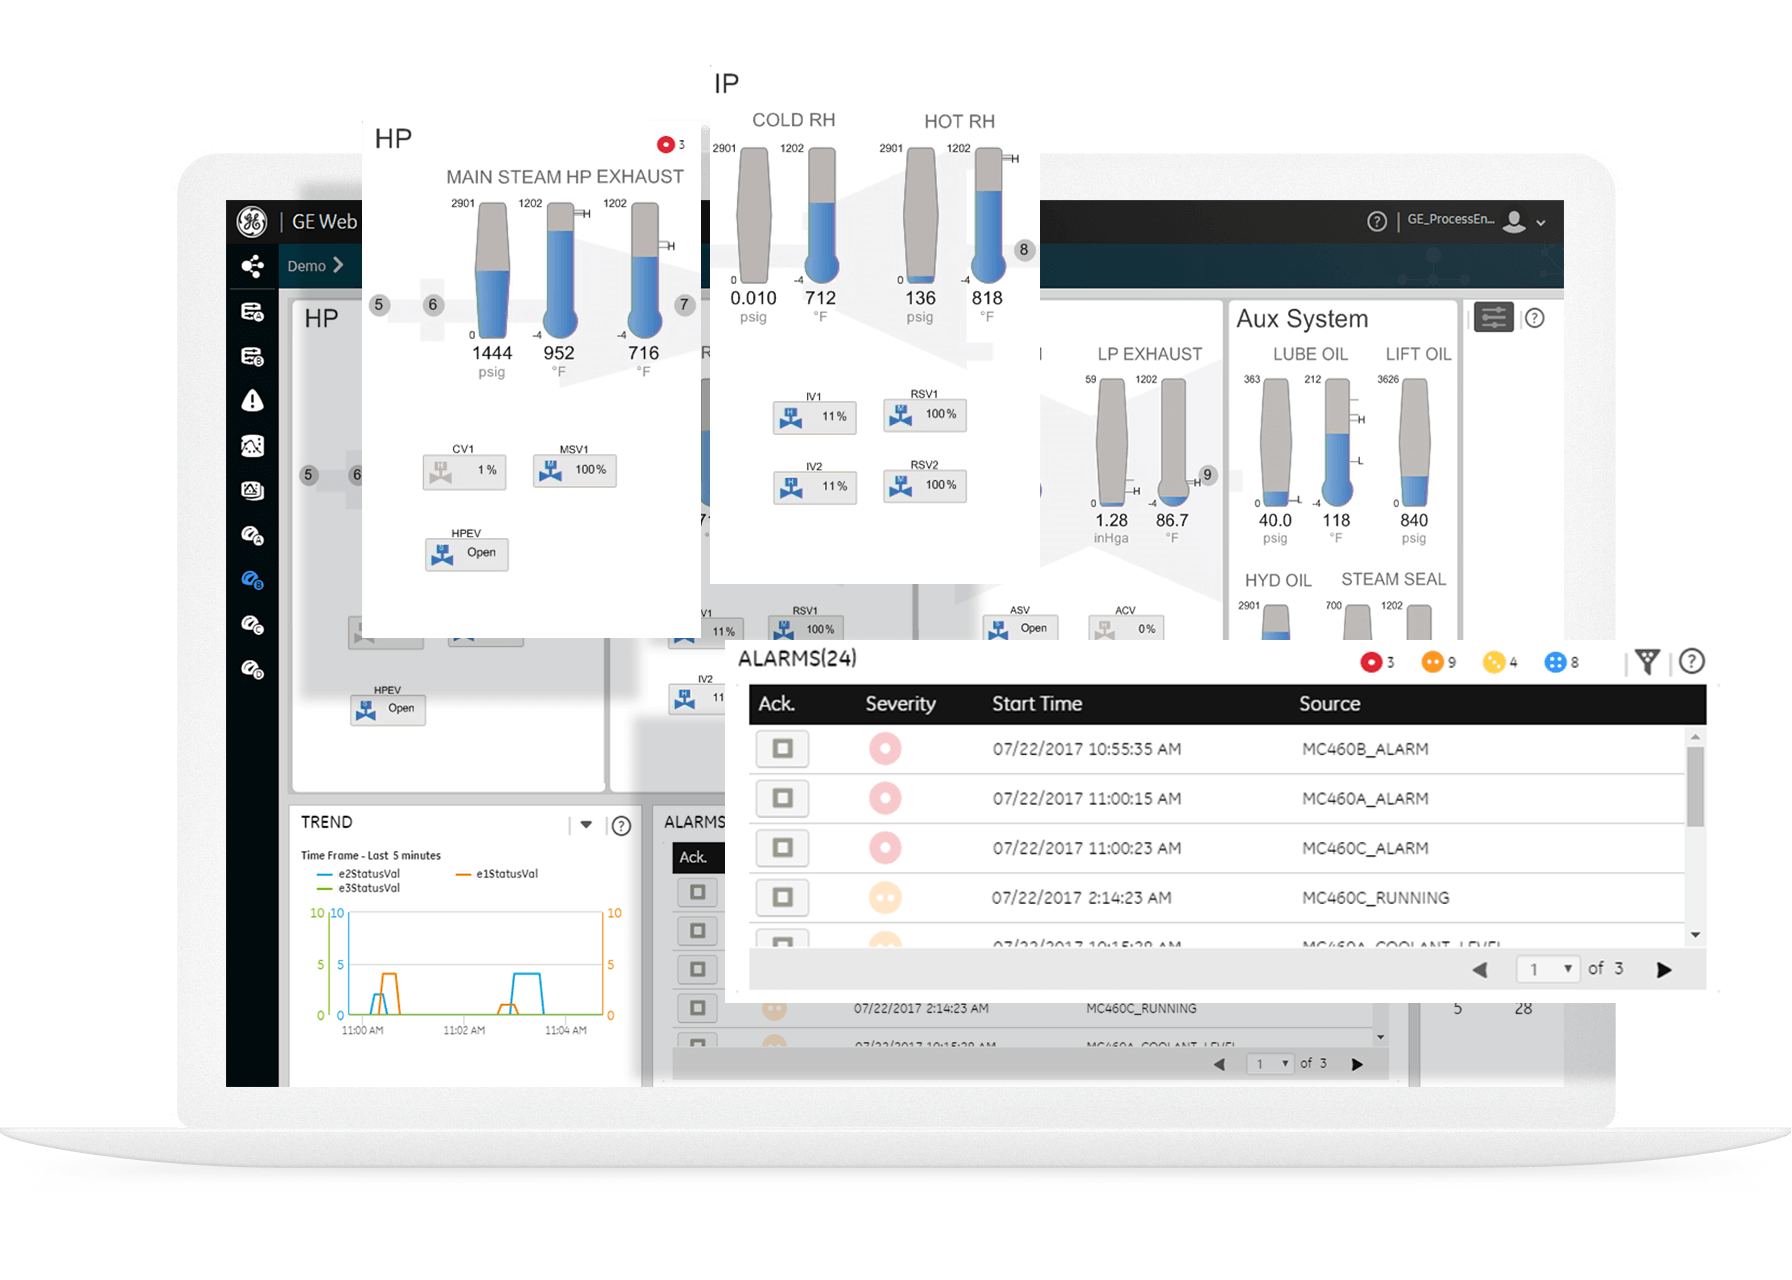 HMI/SCADA software from GE Digital | iFIX for alarm management and operational visibility